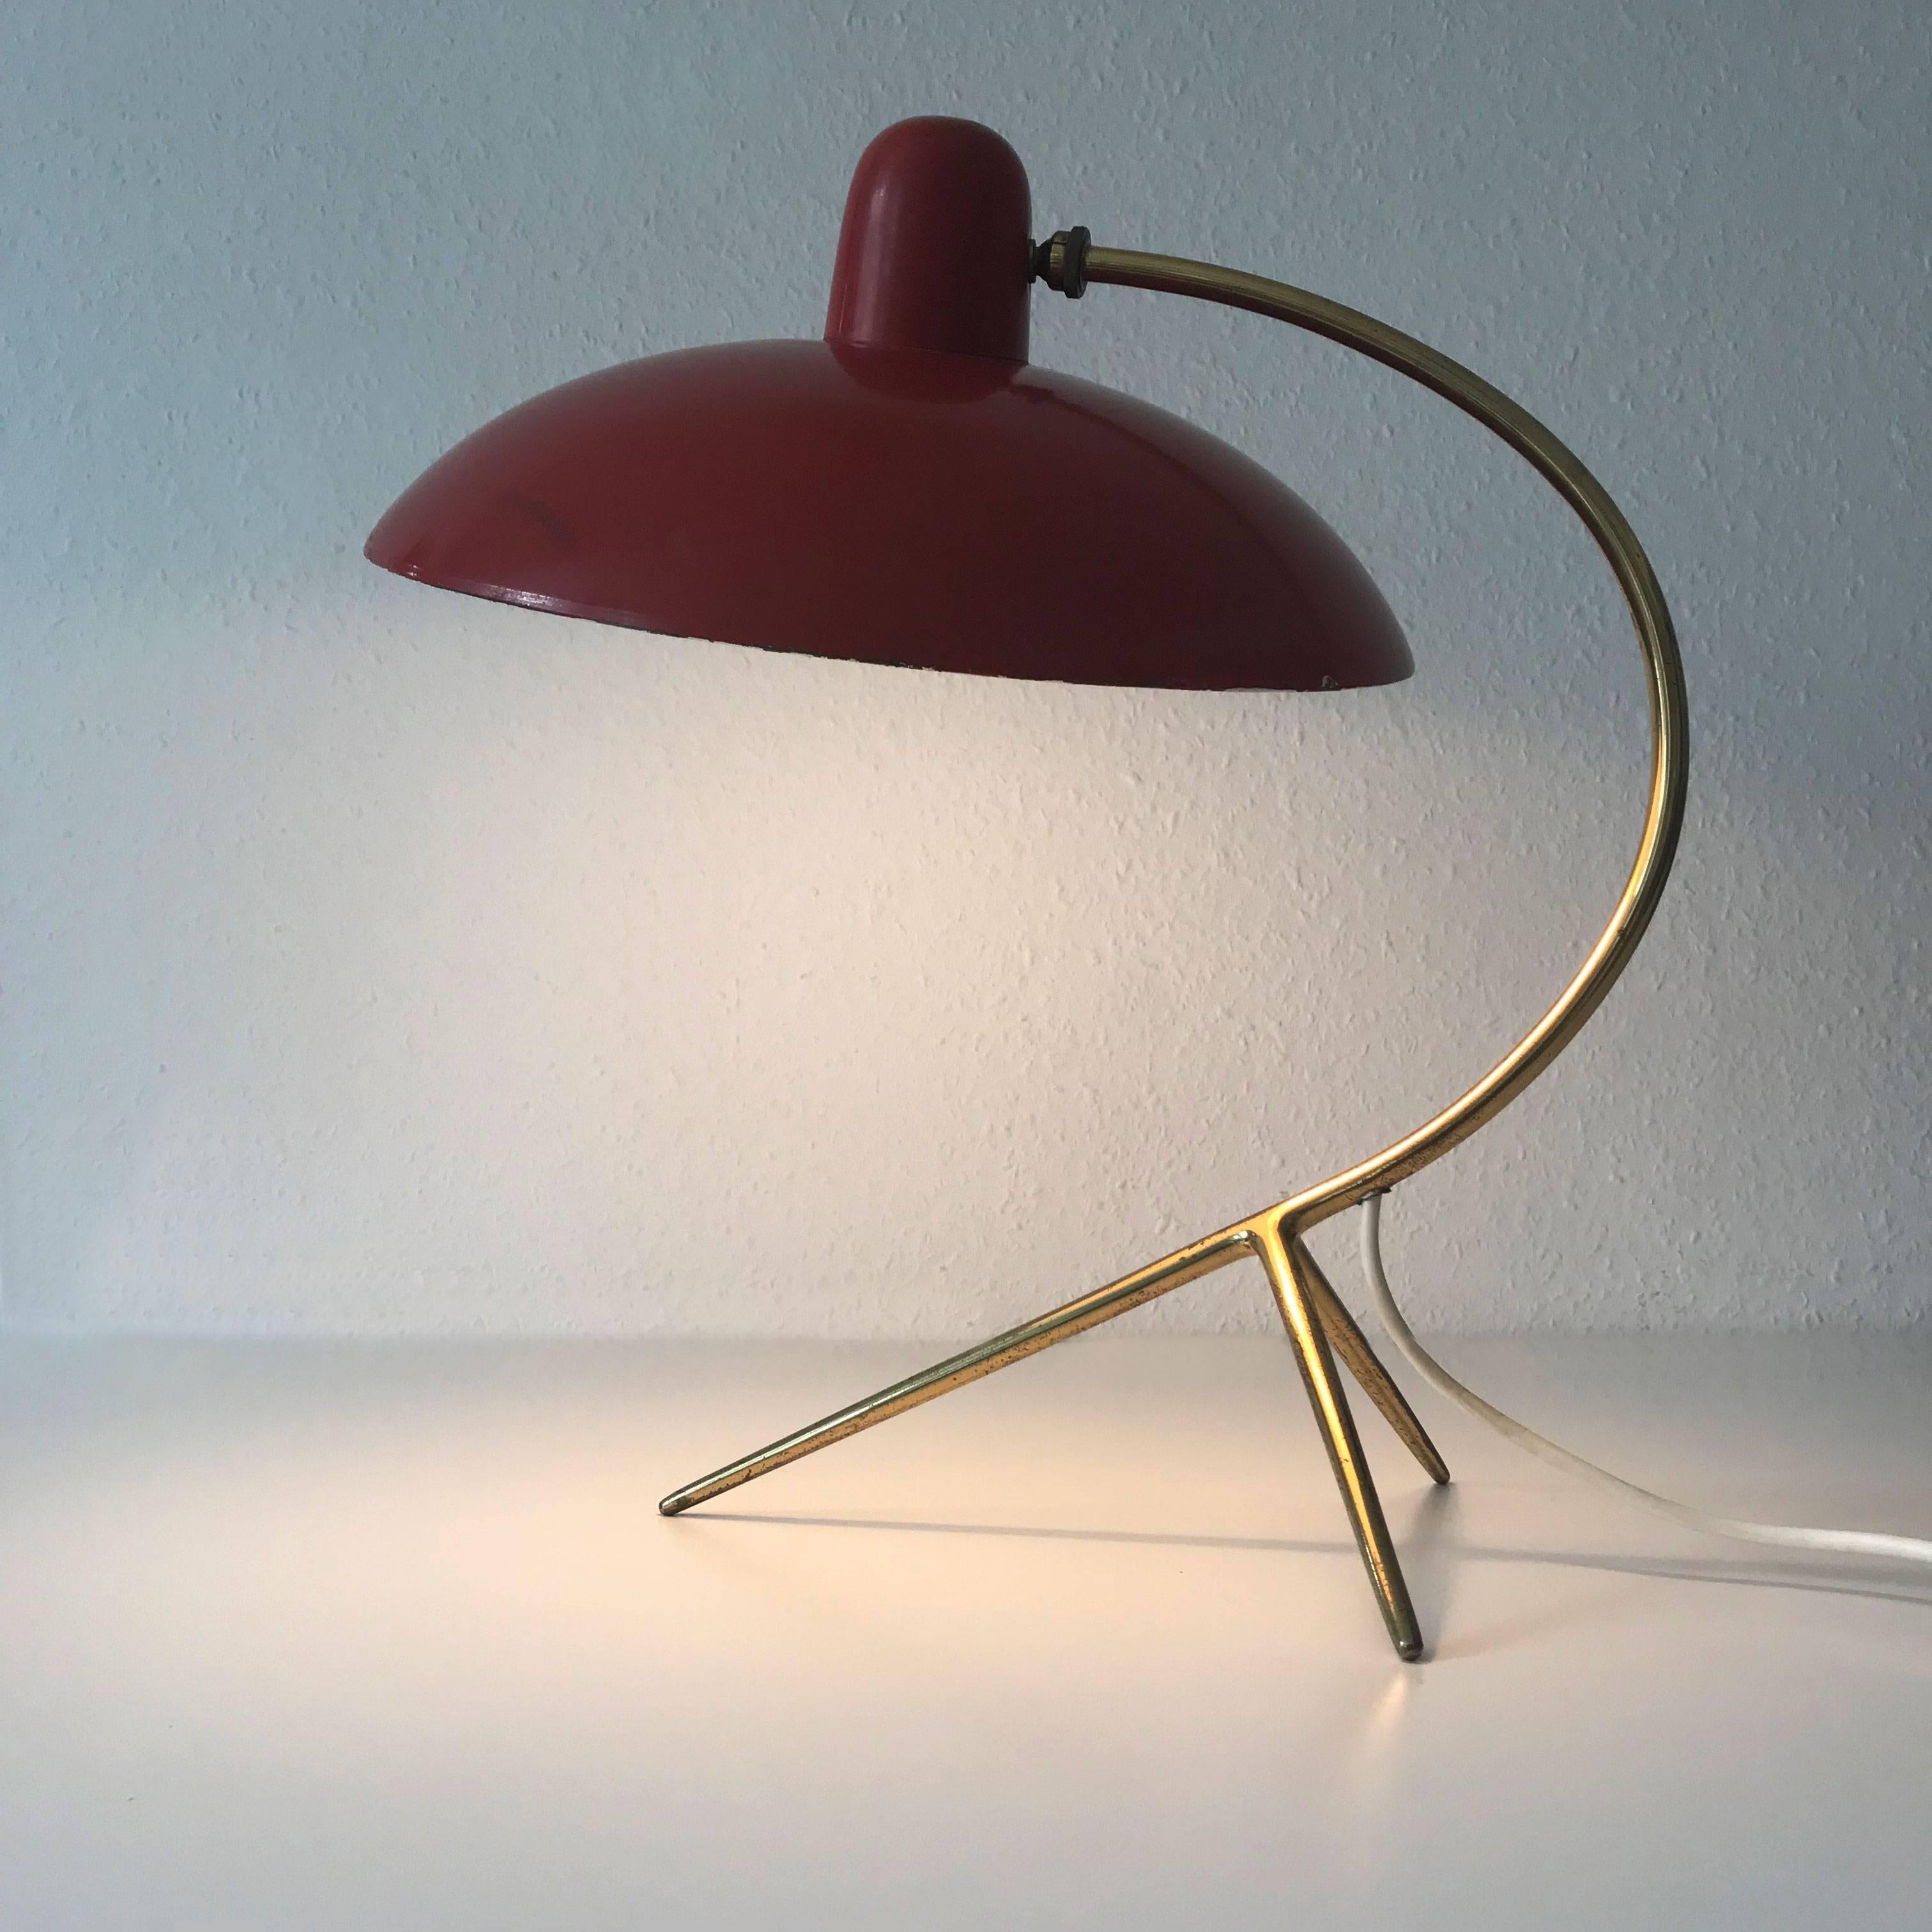 Gorgeous, large Mid-Century Modern table lamp in a rare tomato red color. Designed and manufactured in 1950s, Italy.
This elegant table lamp is executed in brass and tomato red lacquered metal lamp shade.
It is executed with a E27 screw fit bulb